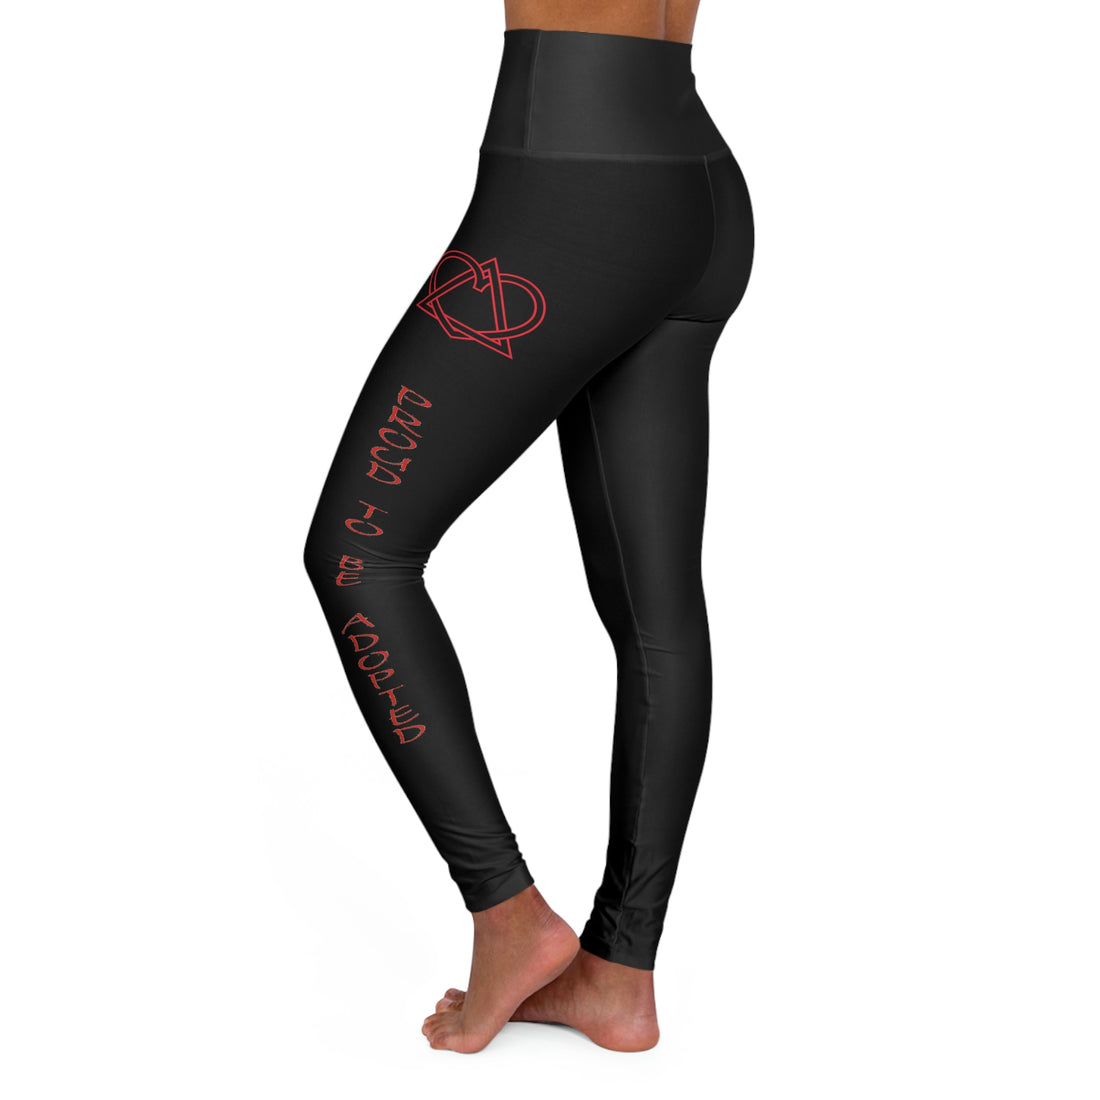 Proud to be Adopted - Black High Waisted Yoga Leggings